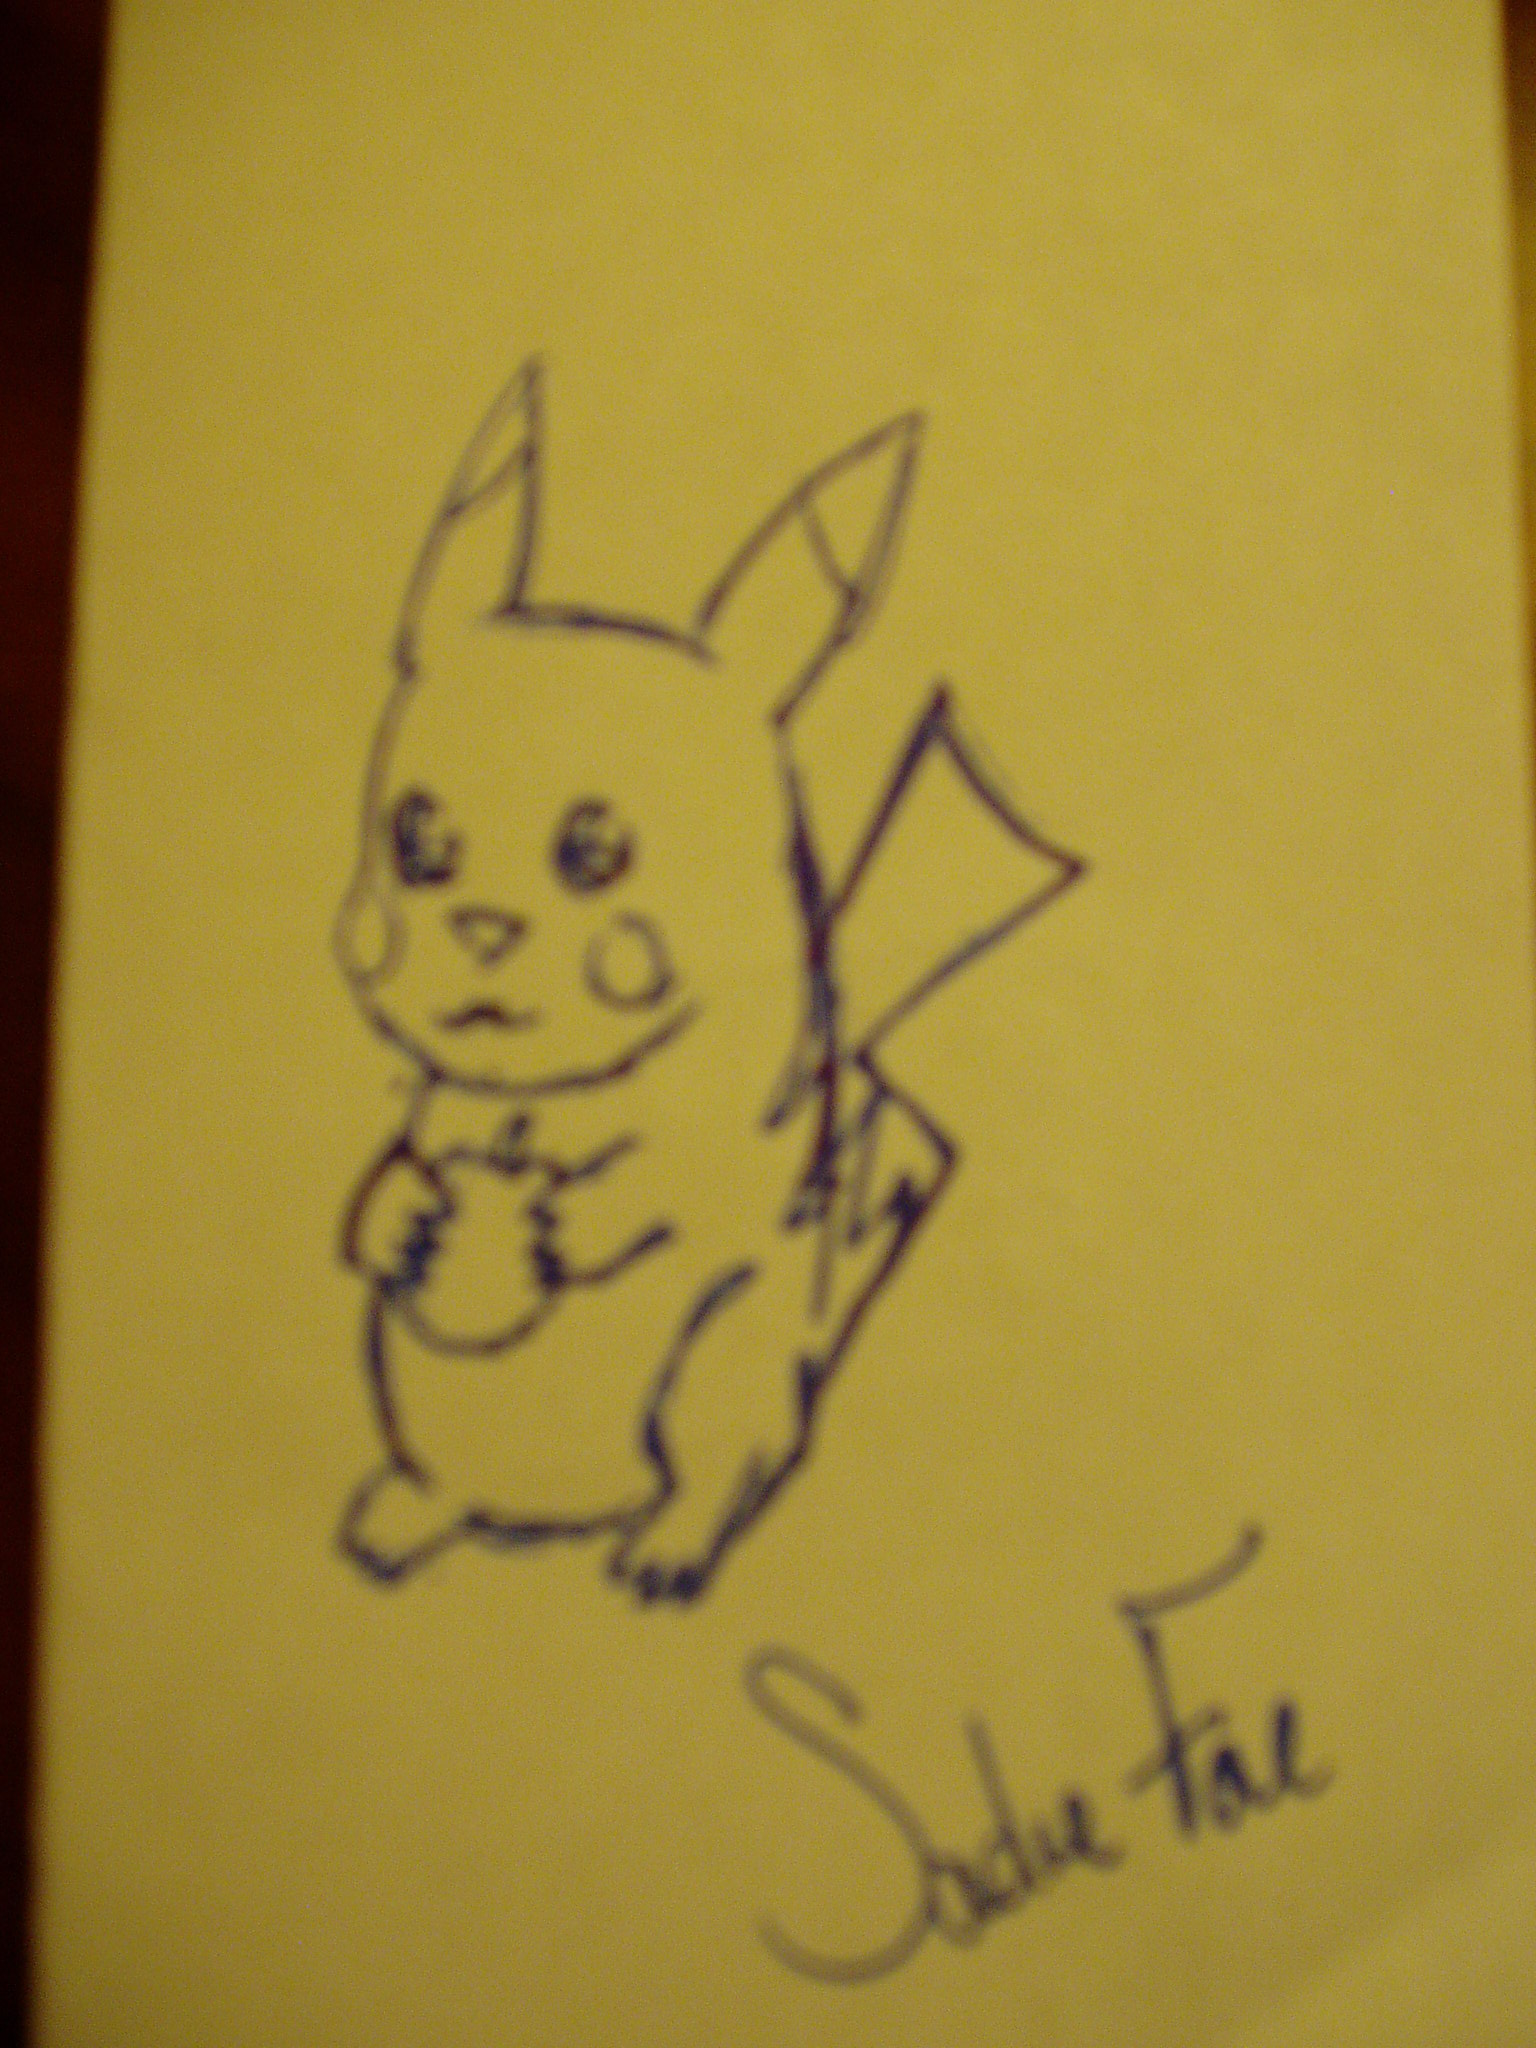 Met Sadie, and she drew me a picture of Pikachu. Ain't that cute?